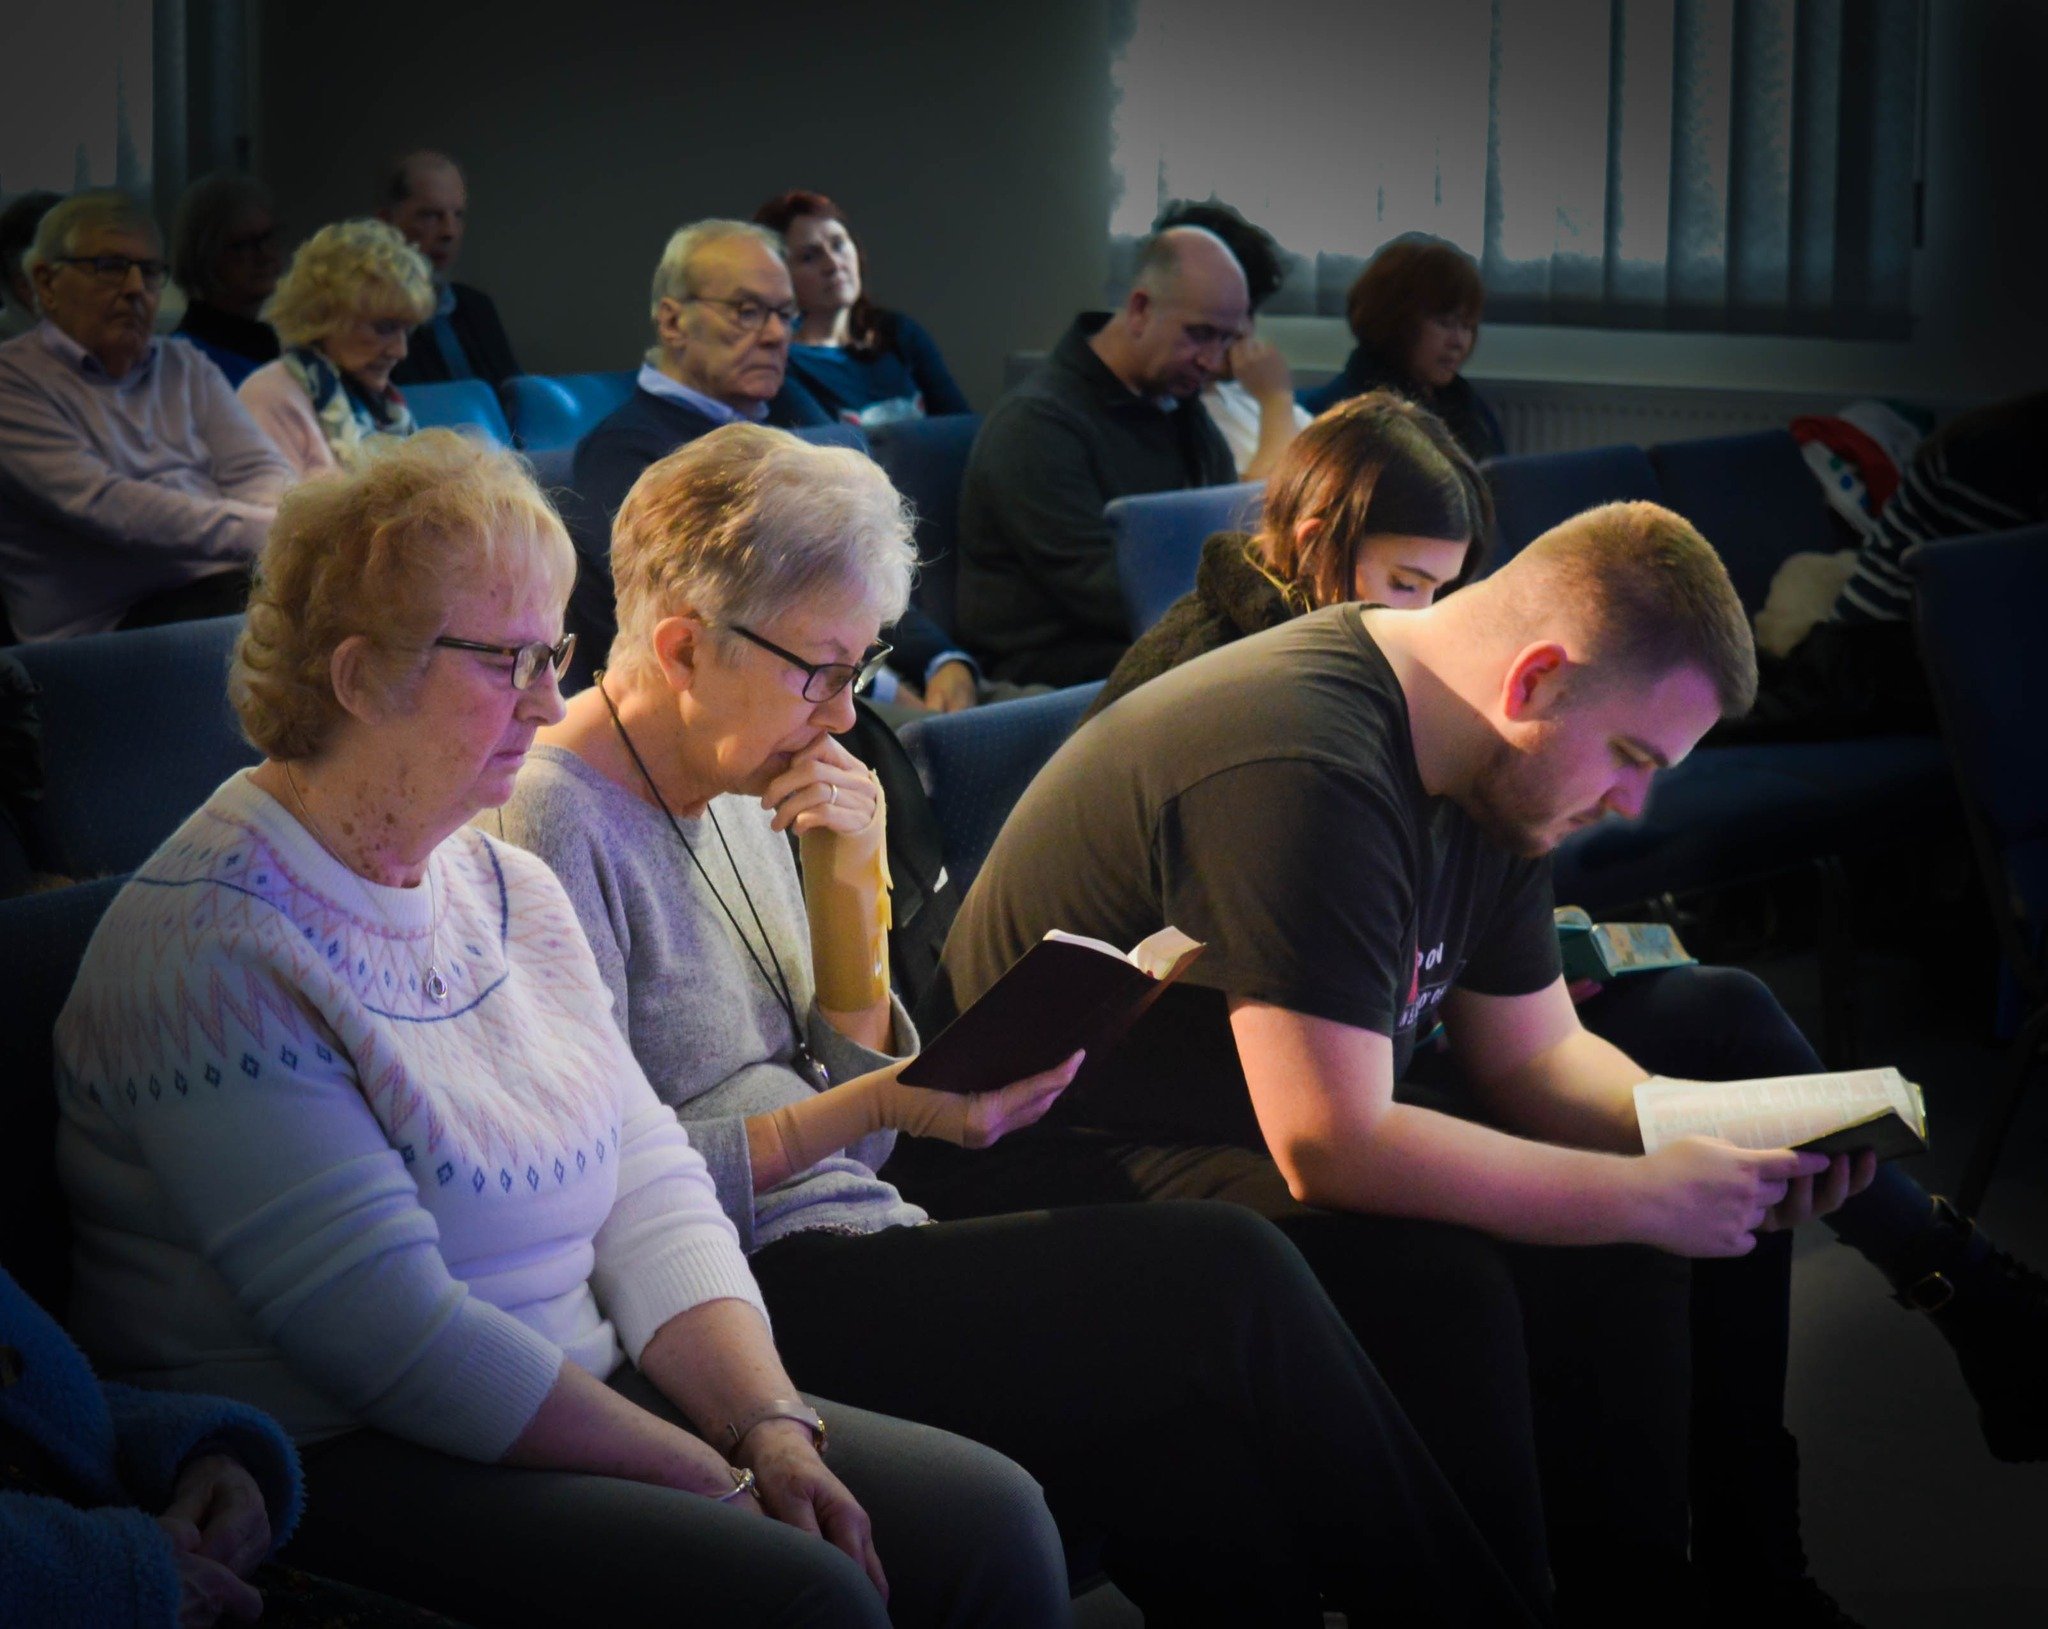 Join us today at our Sunday service as we explore the rich teachings of the Scriptures together. Whether at 10:30 a.m. in Wakefield or 3:30 p.m. in Pontefract, you'll find a community deeply committed to understanding and applying the wisdom of the B